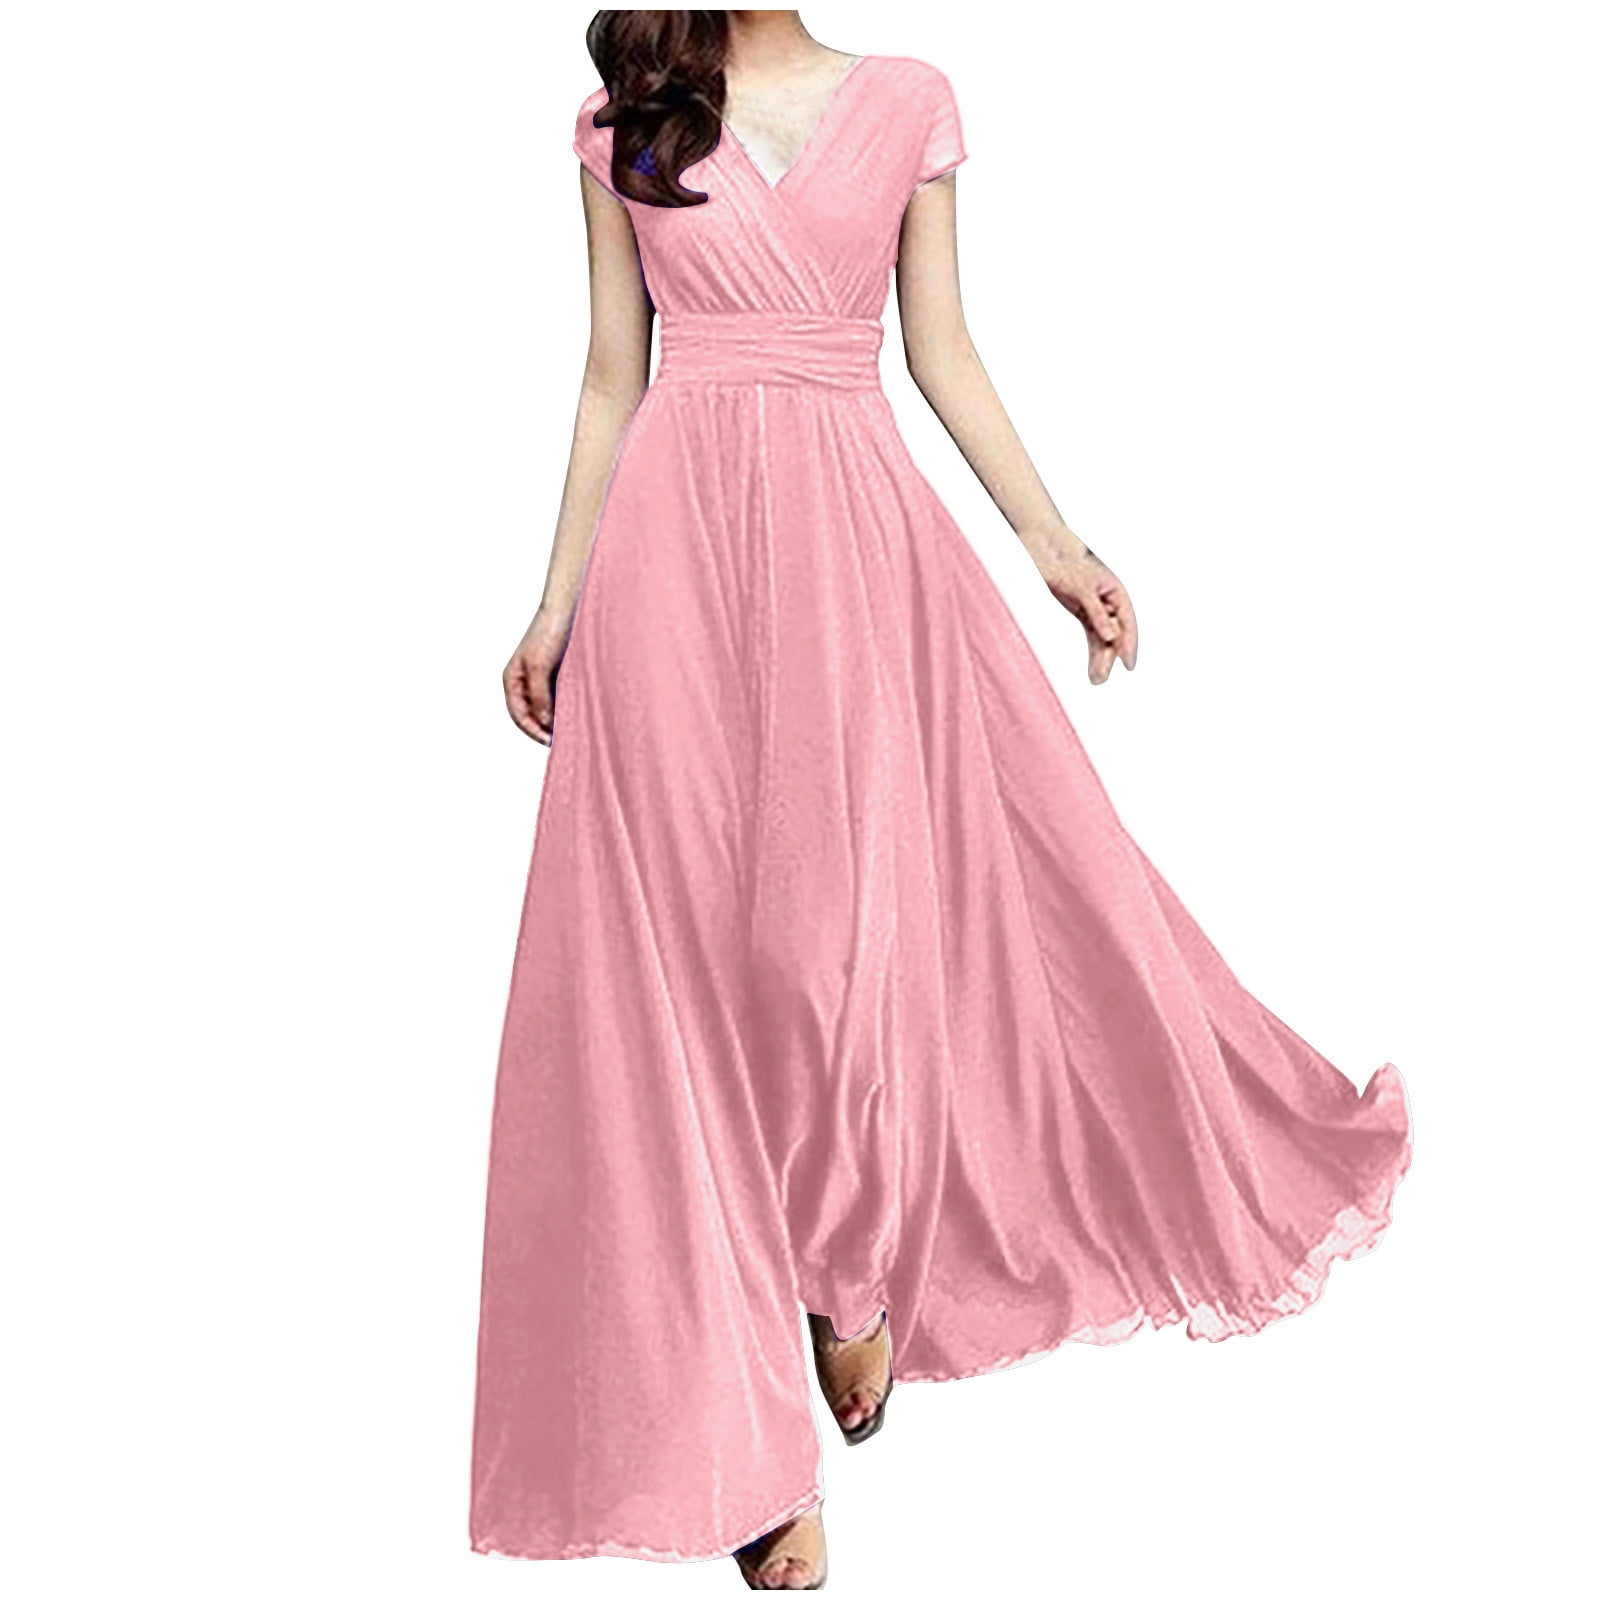 XIUH Plus Size Dress For Women Solid Color Big Swing Maxi Dress Short ...